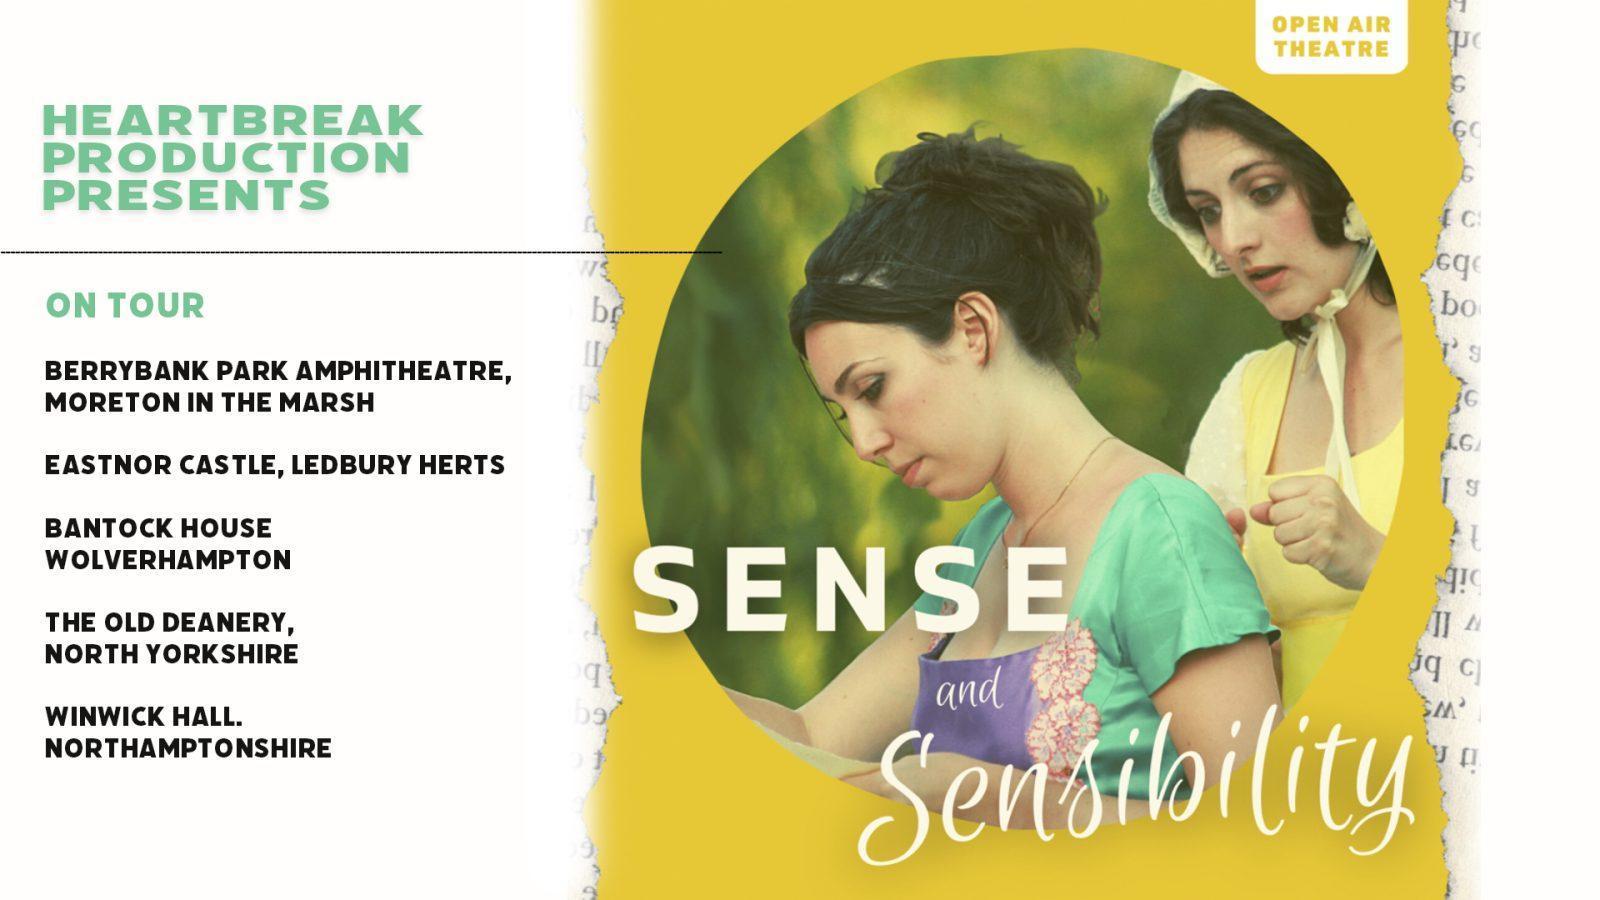 Don your finery and join Heartbreak Productions for their open-air adaptation of Sense and Sensibility.